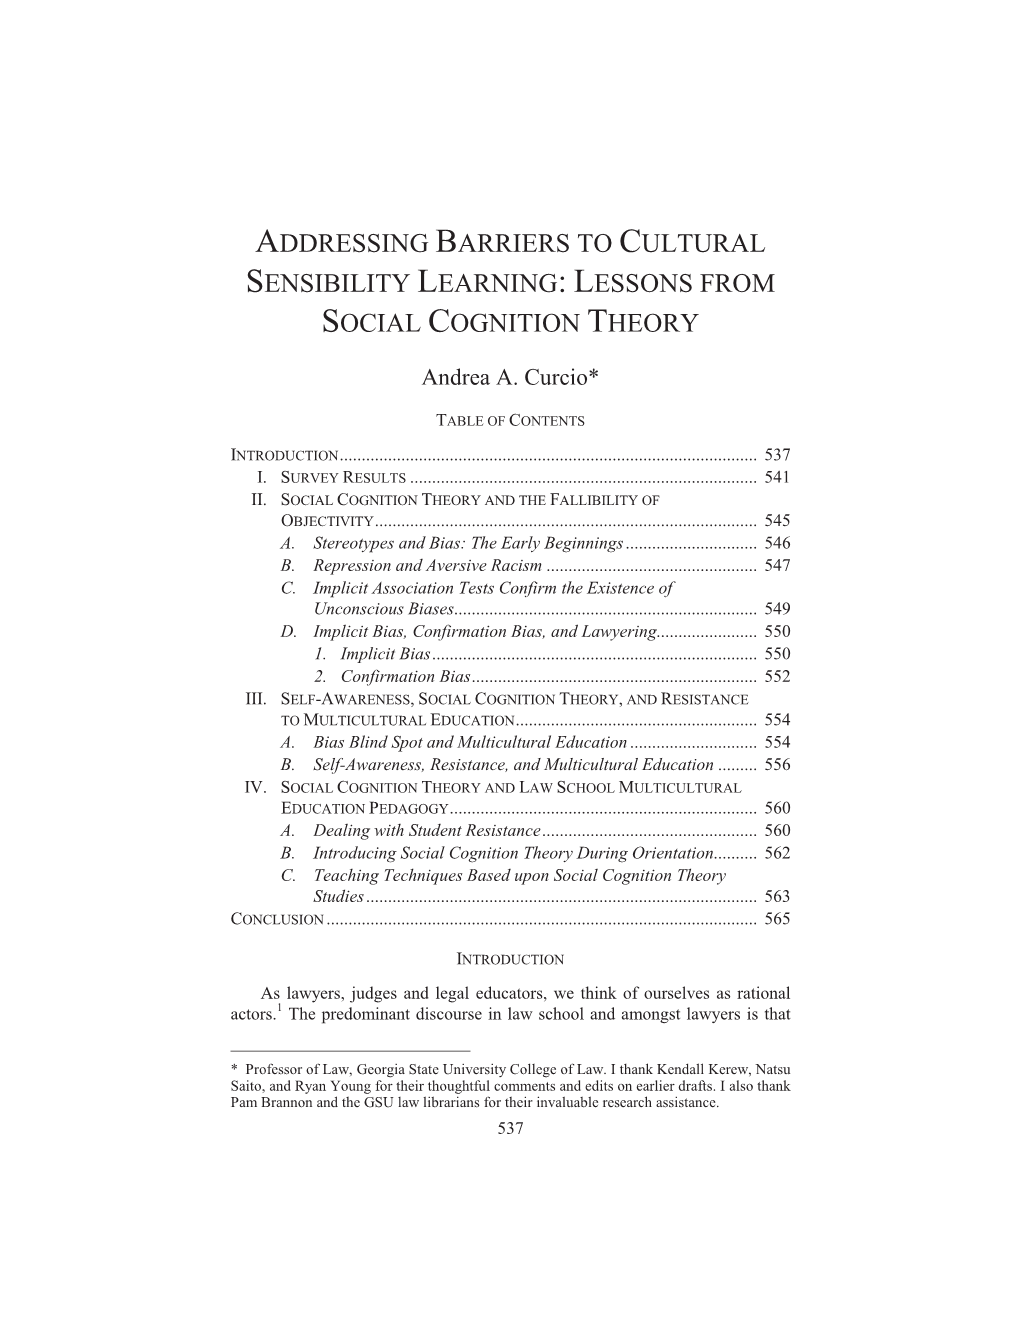 Addressing Barriers to Cultural Sensibility Learning: Lessons from Social Cognition Theory